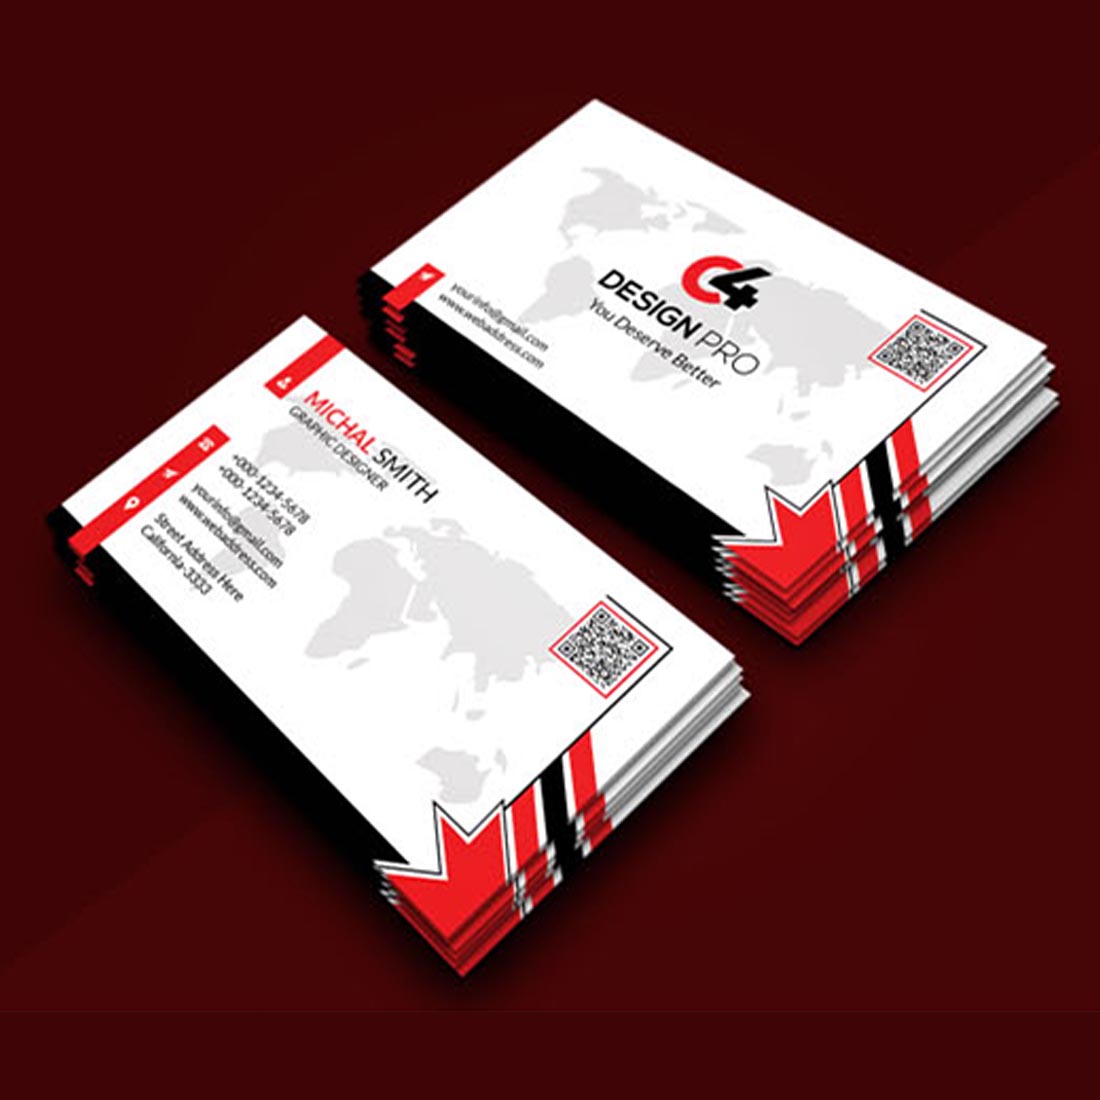 Image of business cards with the holotype with a white background and red inserts.